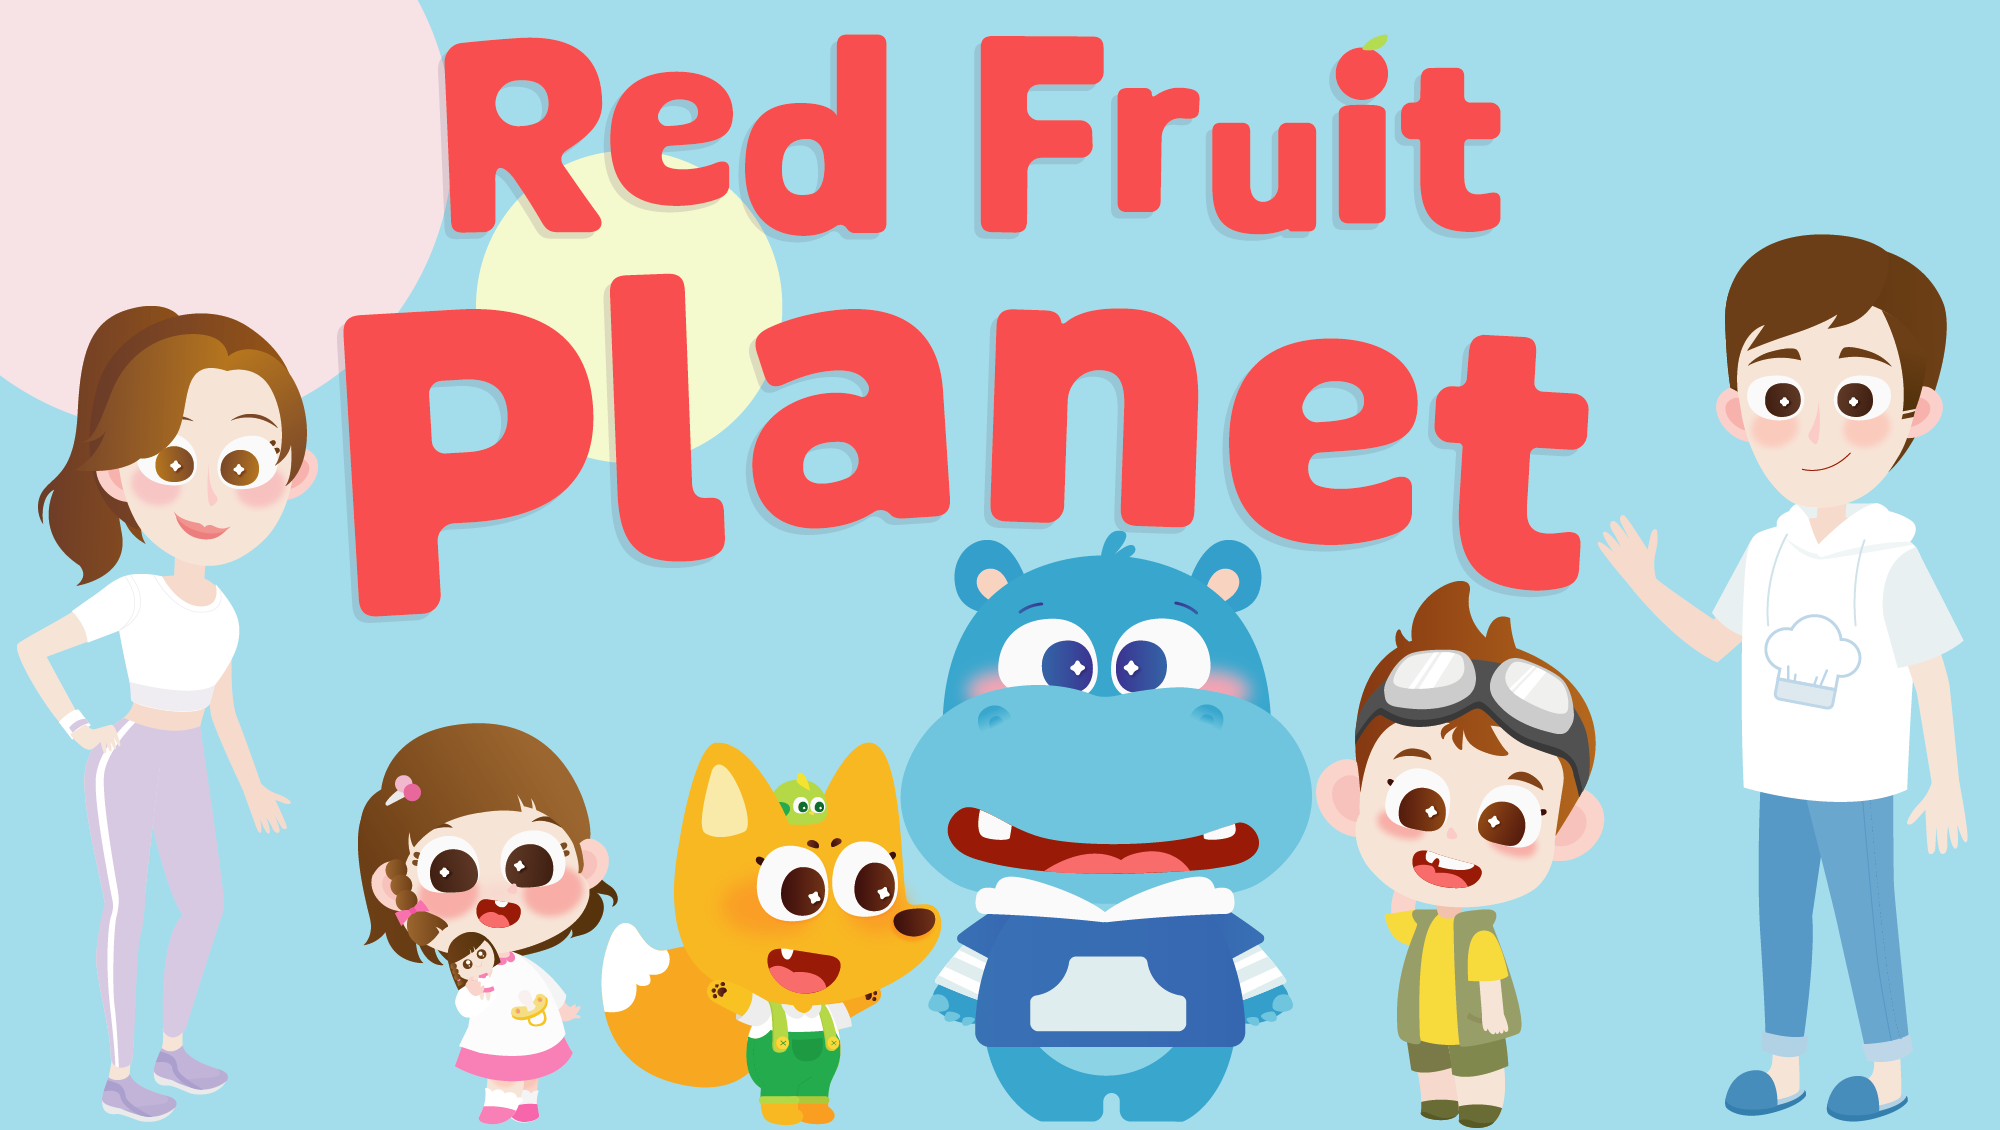 Red Fruit Planet